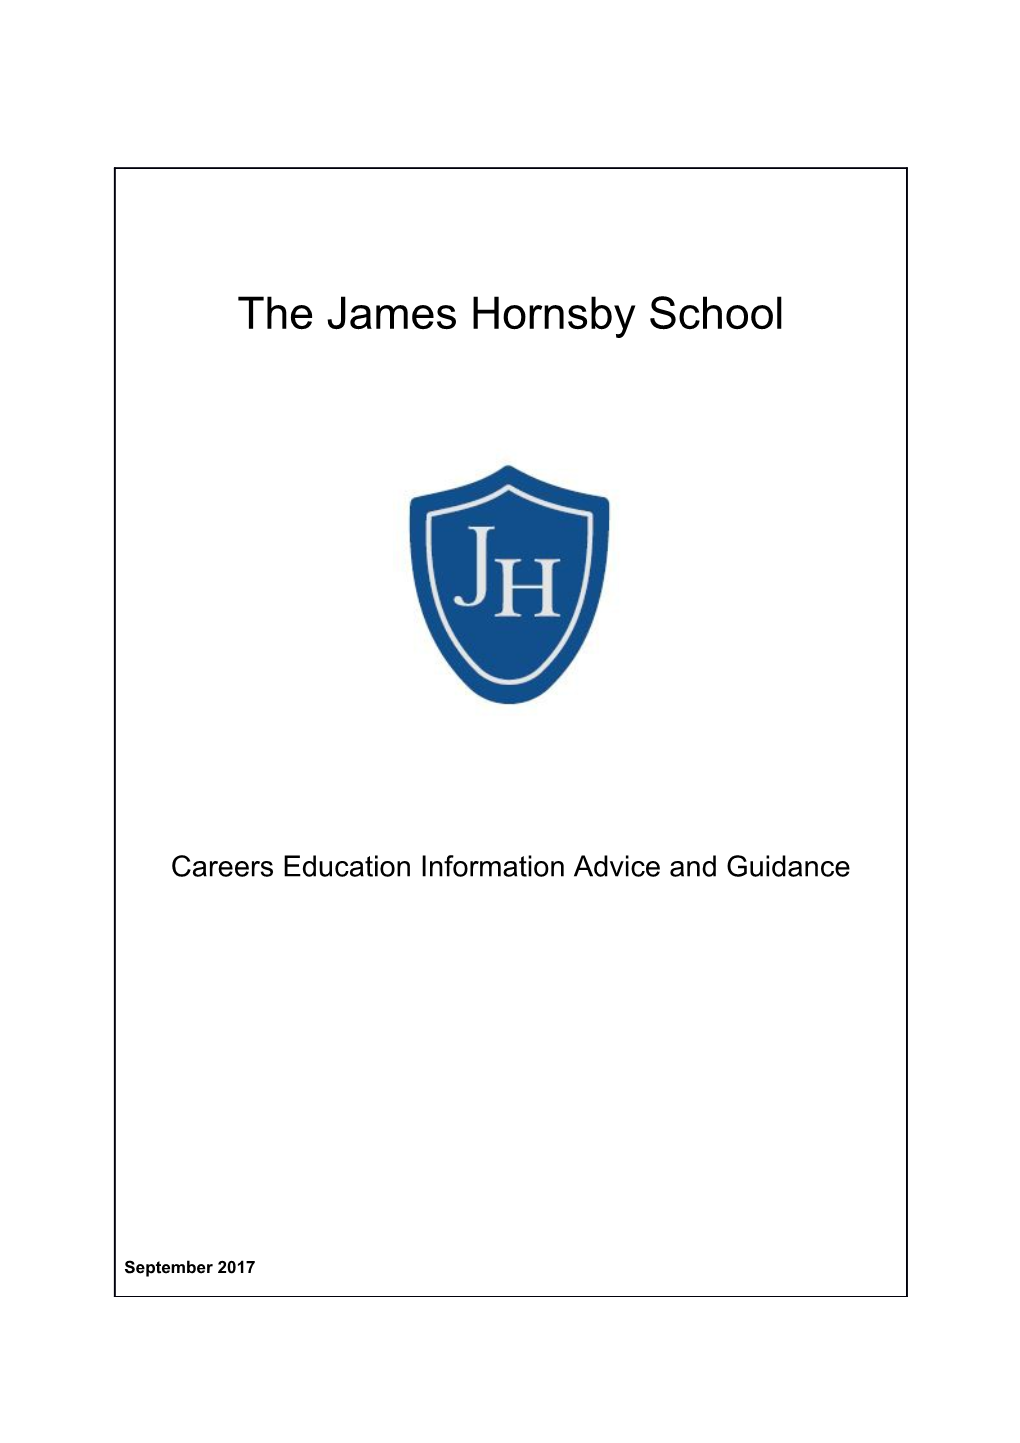 Careers Education Information Advice and Guidance Policy